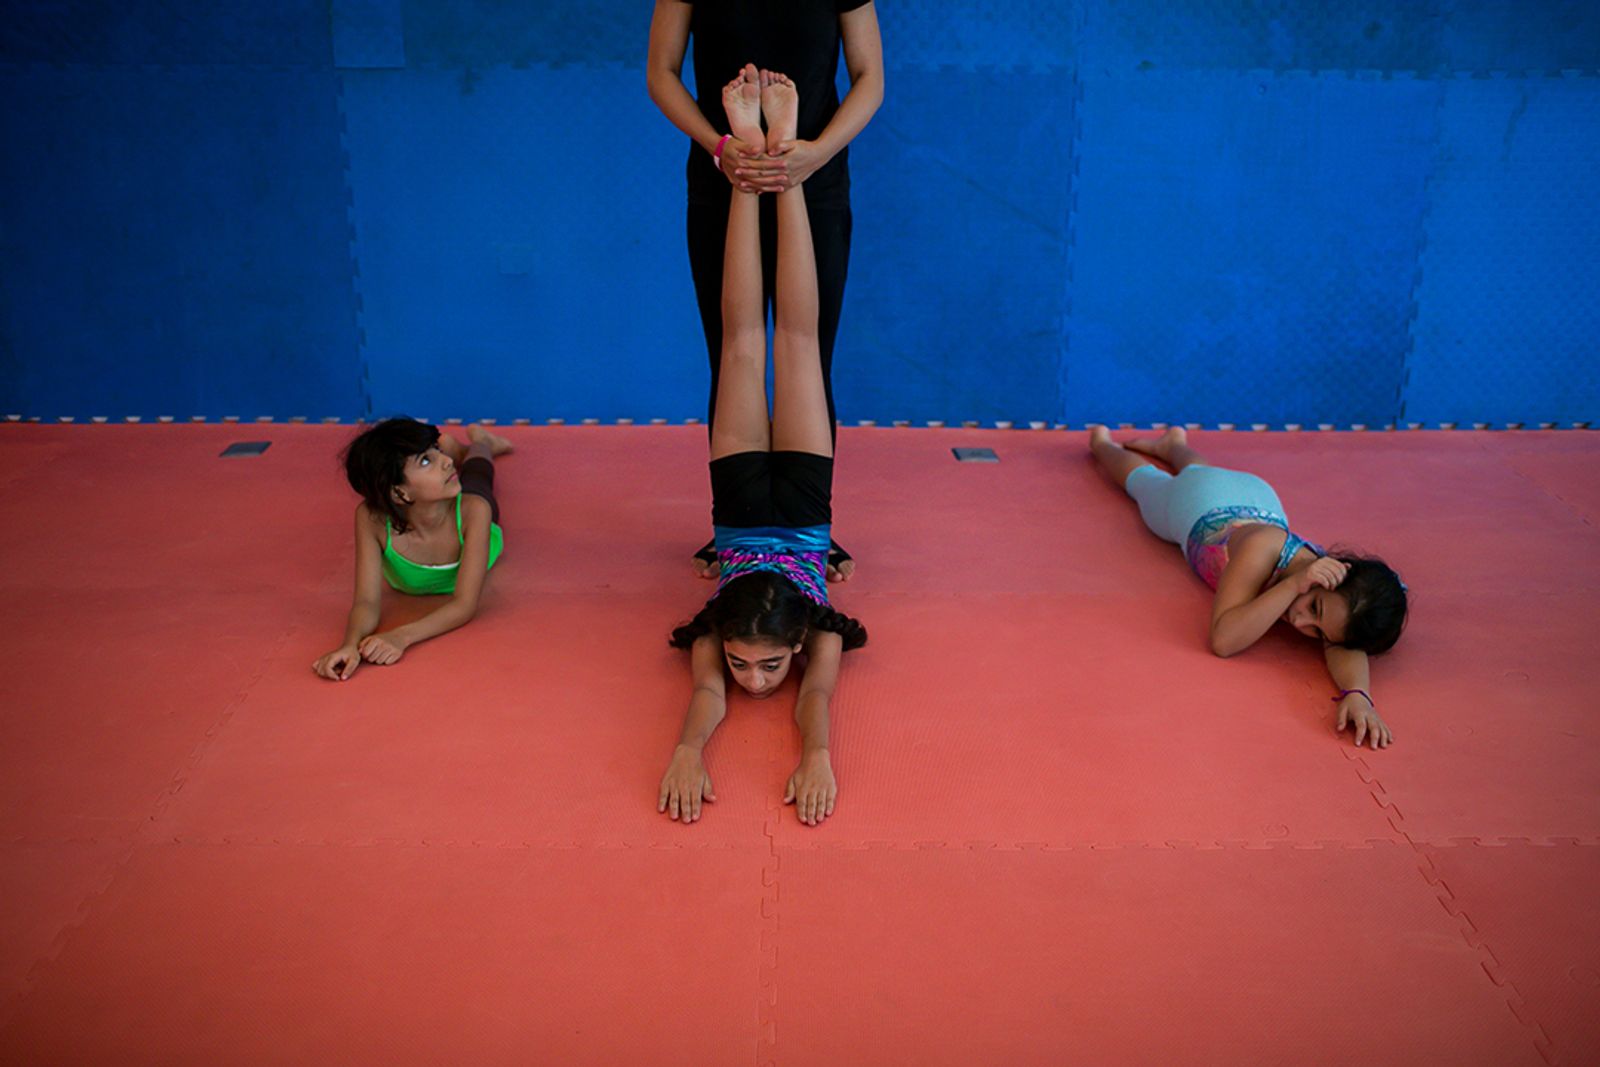 © Tasneem Alsultan - Mai’s daughter, weekly attends a young girls gym in Jeddah. She aspires to be an actress and acrobat.